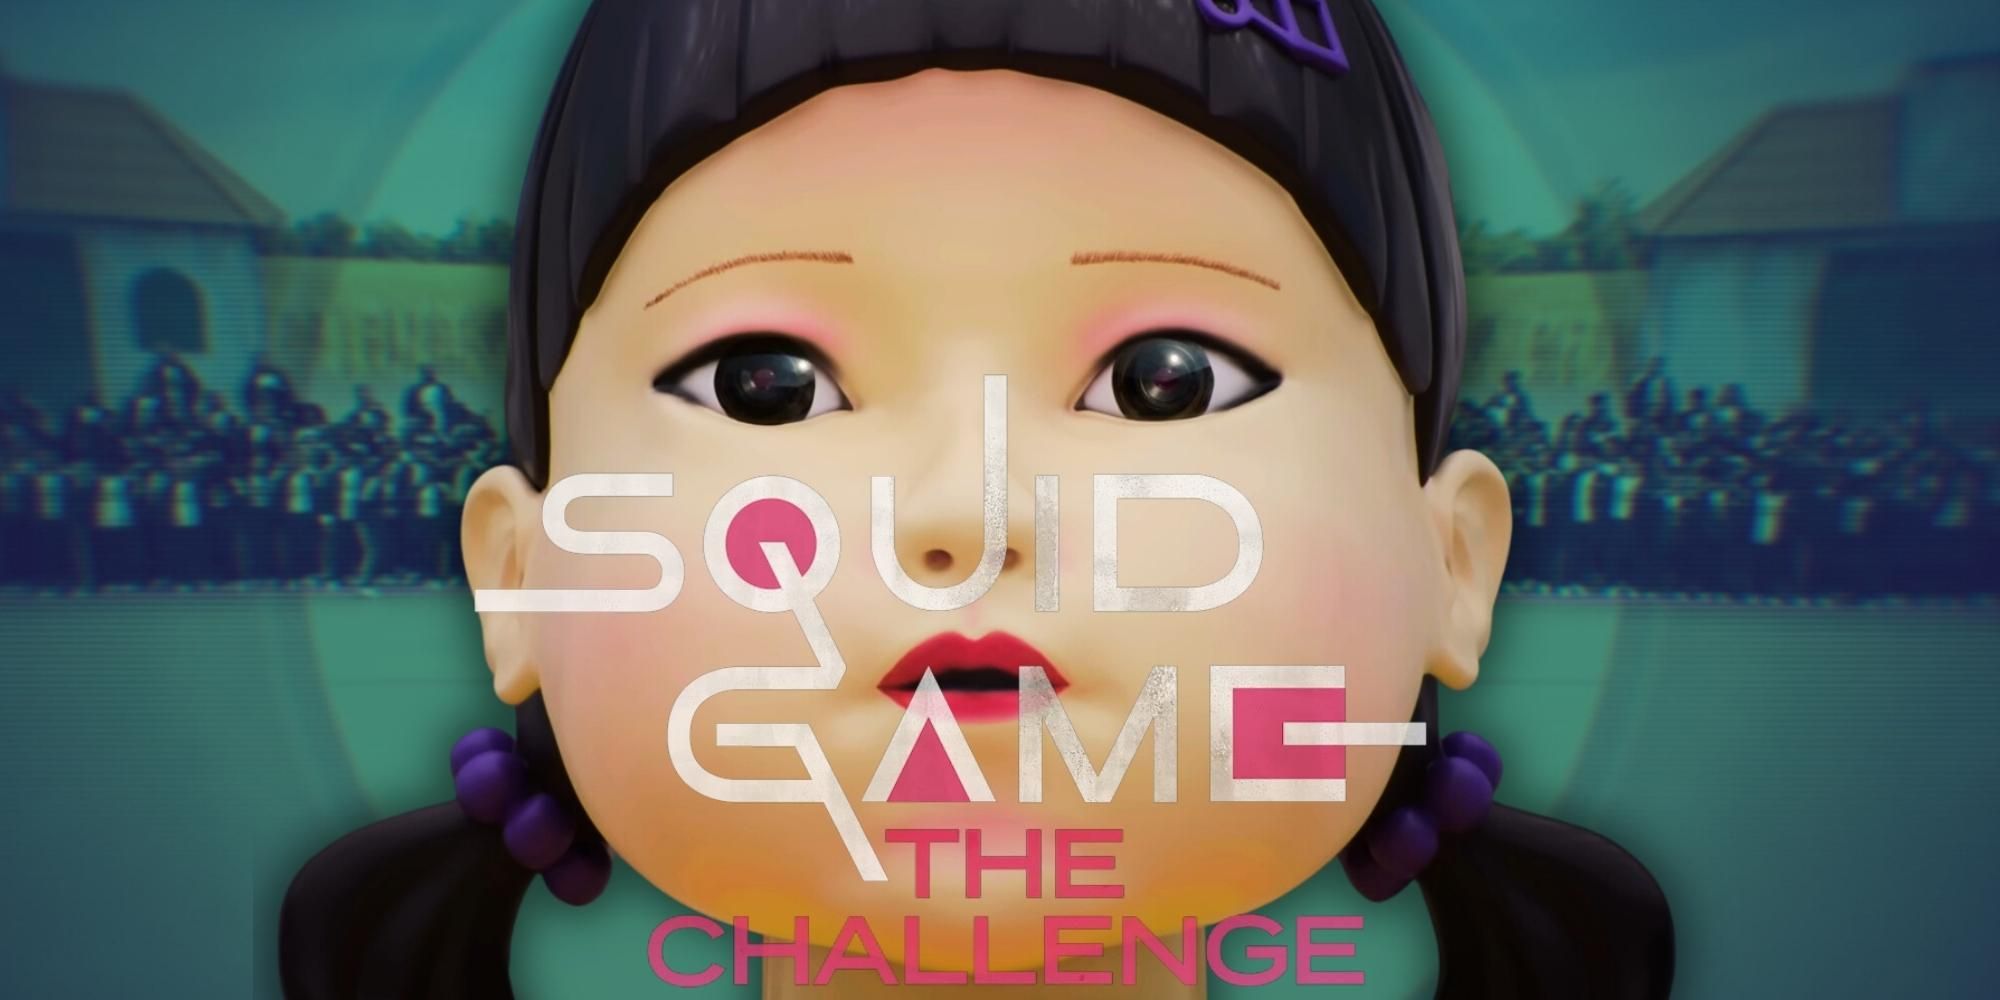 Netflix 'Squid Games' reality show drops 'savage' first trailer